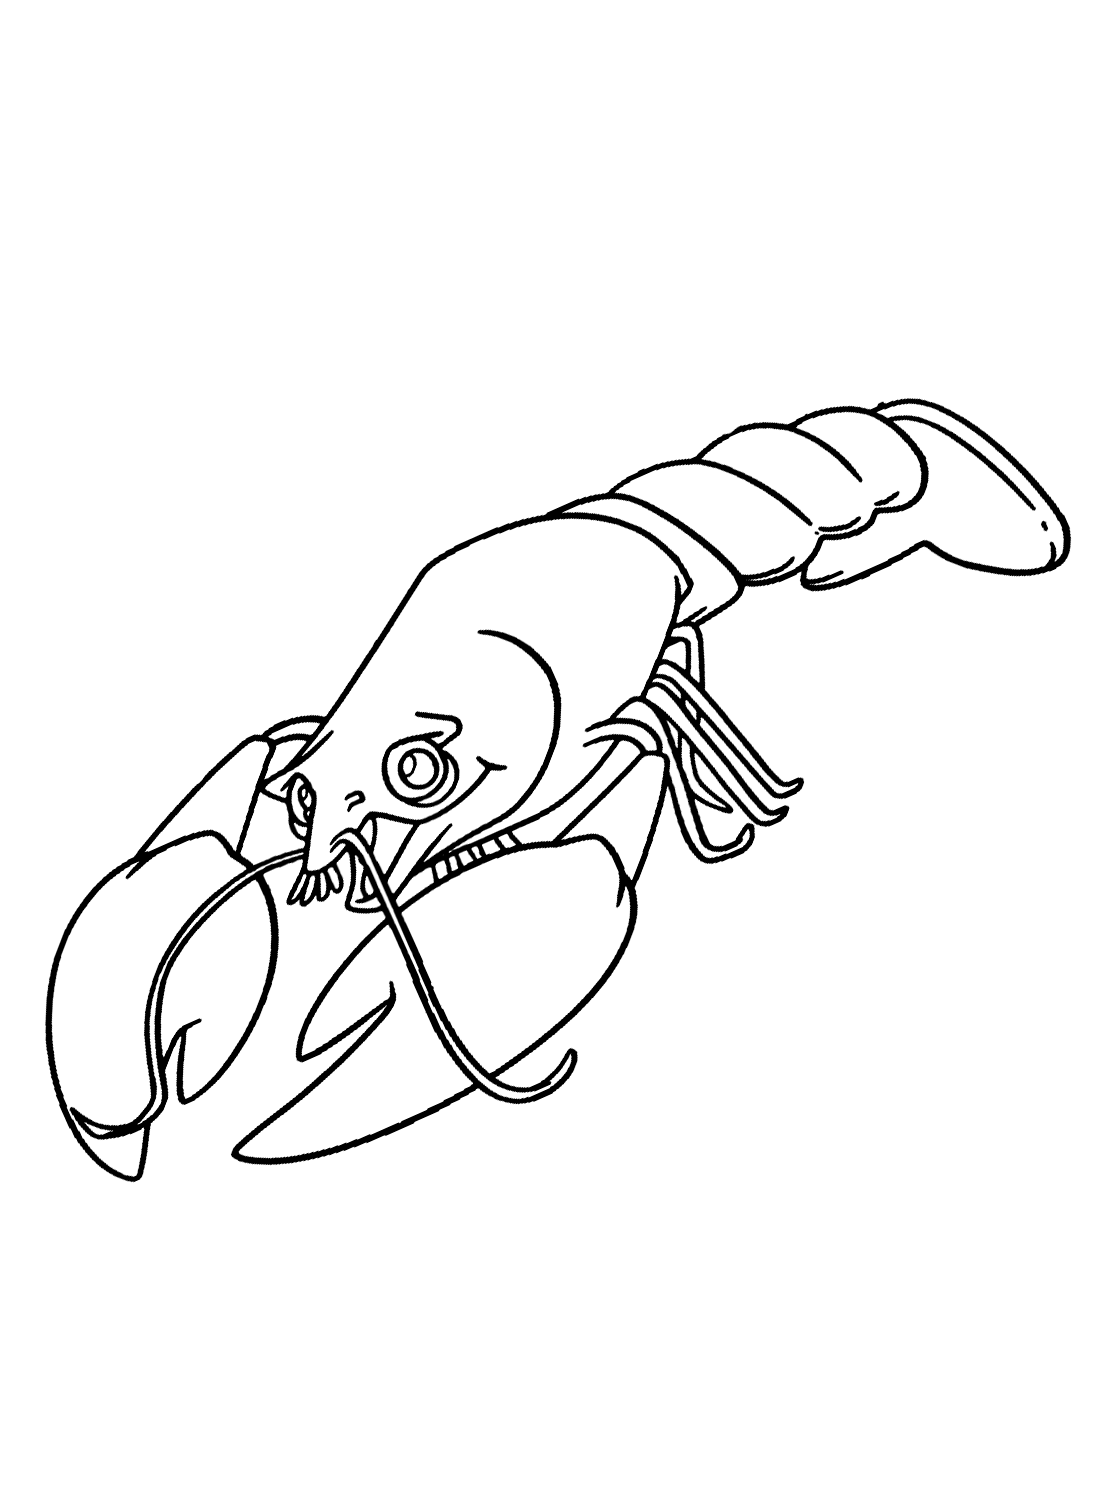 Crawfish coloring pages printable for free download